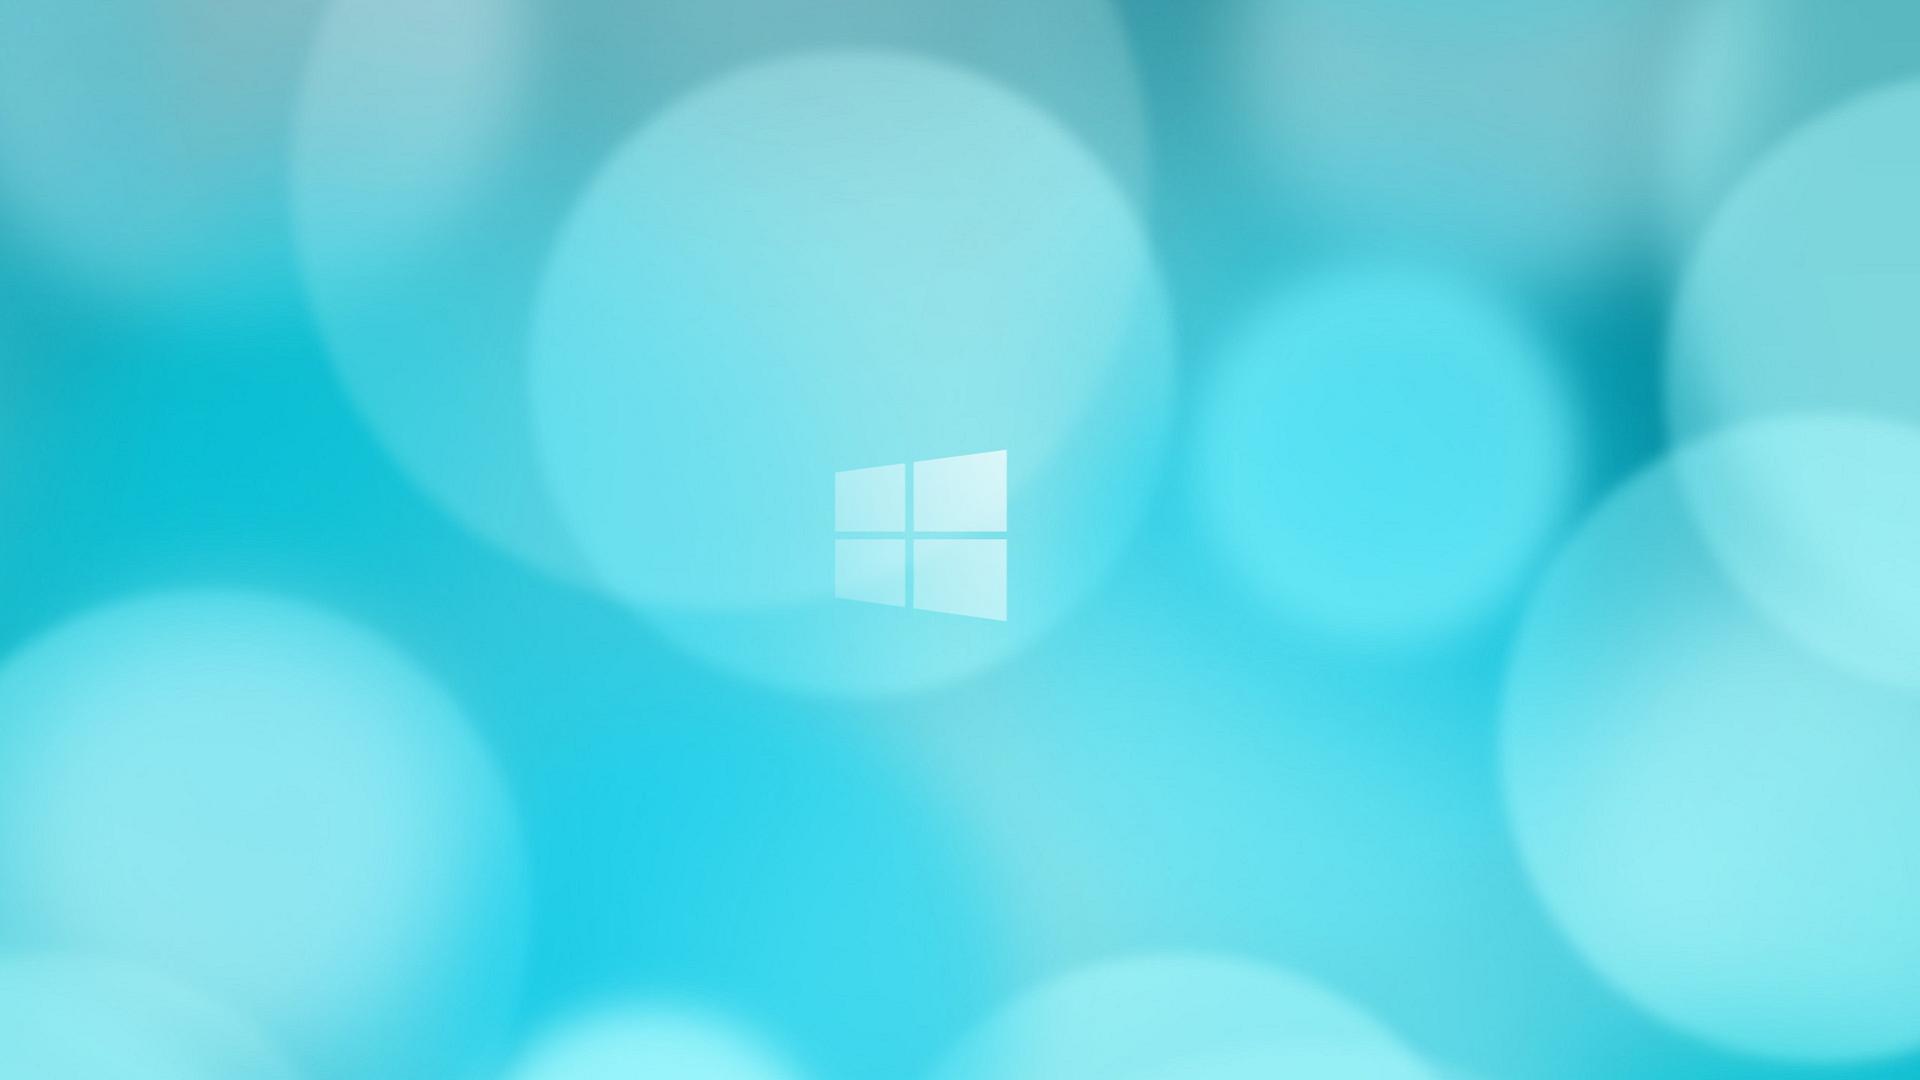 Cool Windows Backgrounds Wallpapers